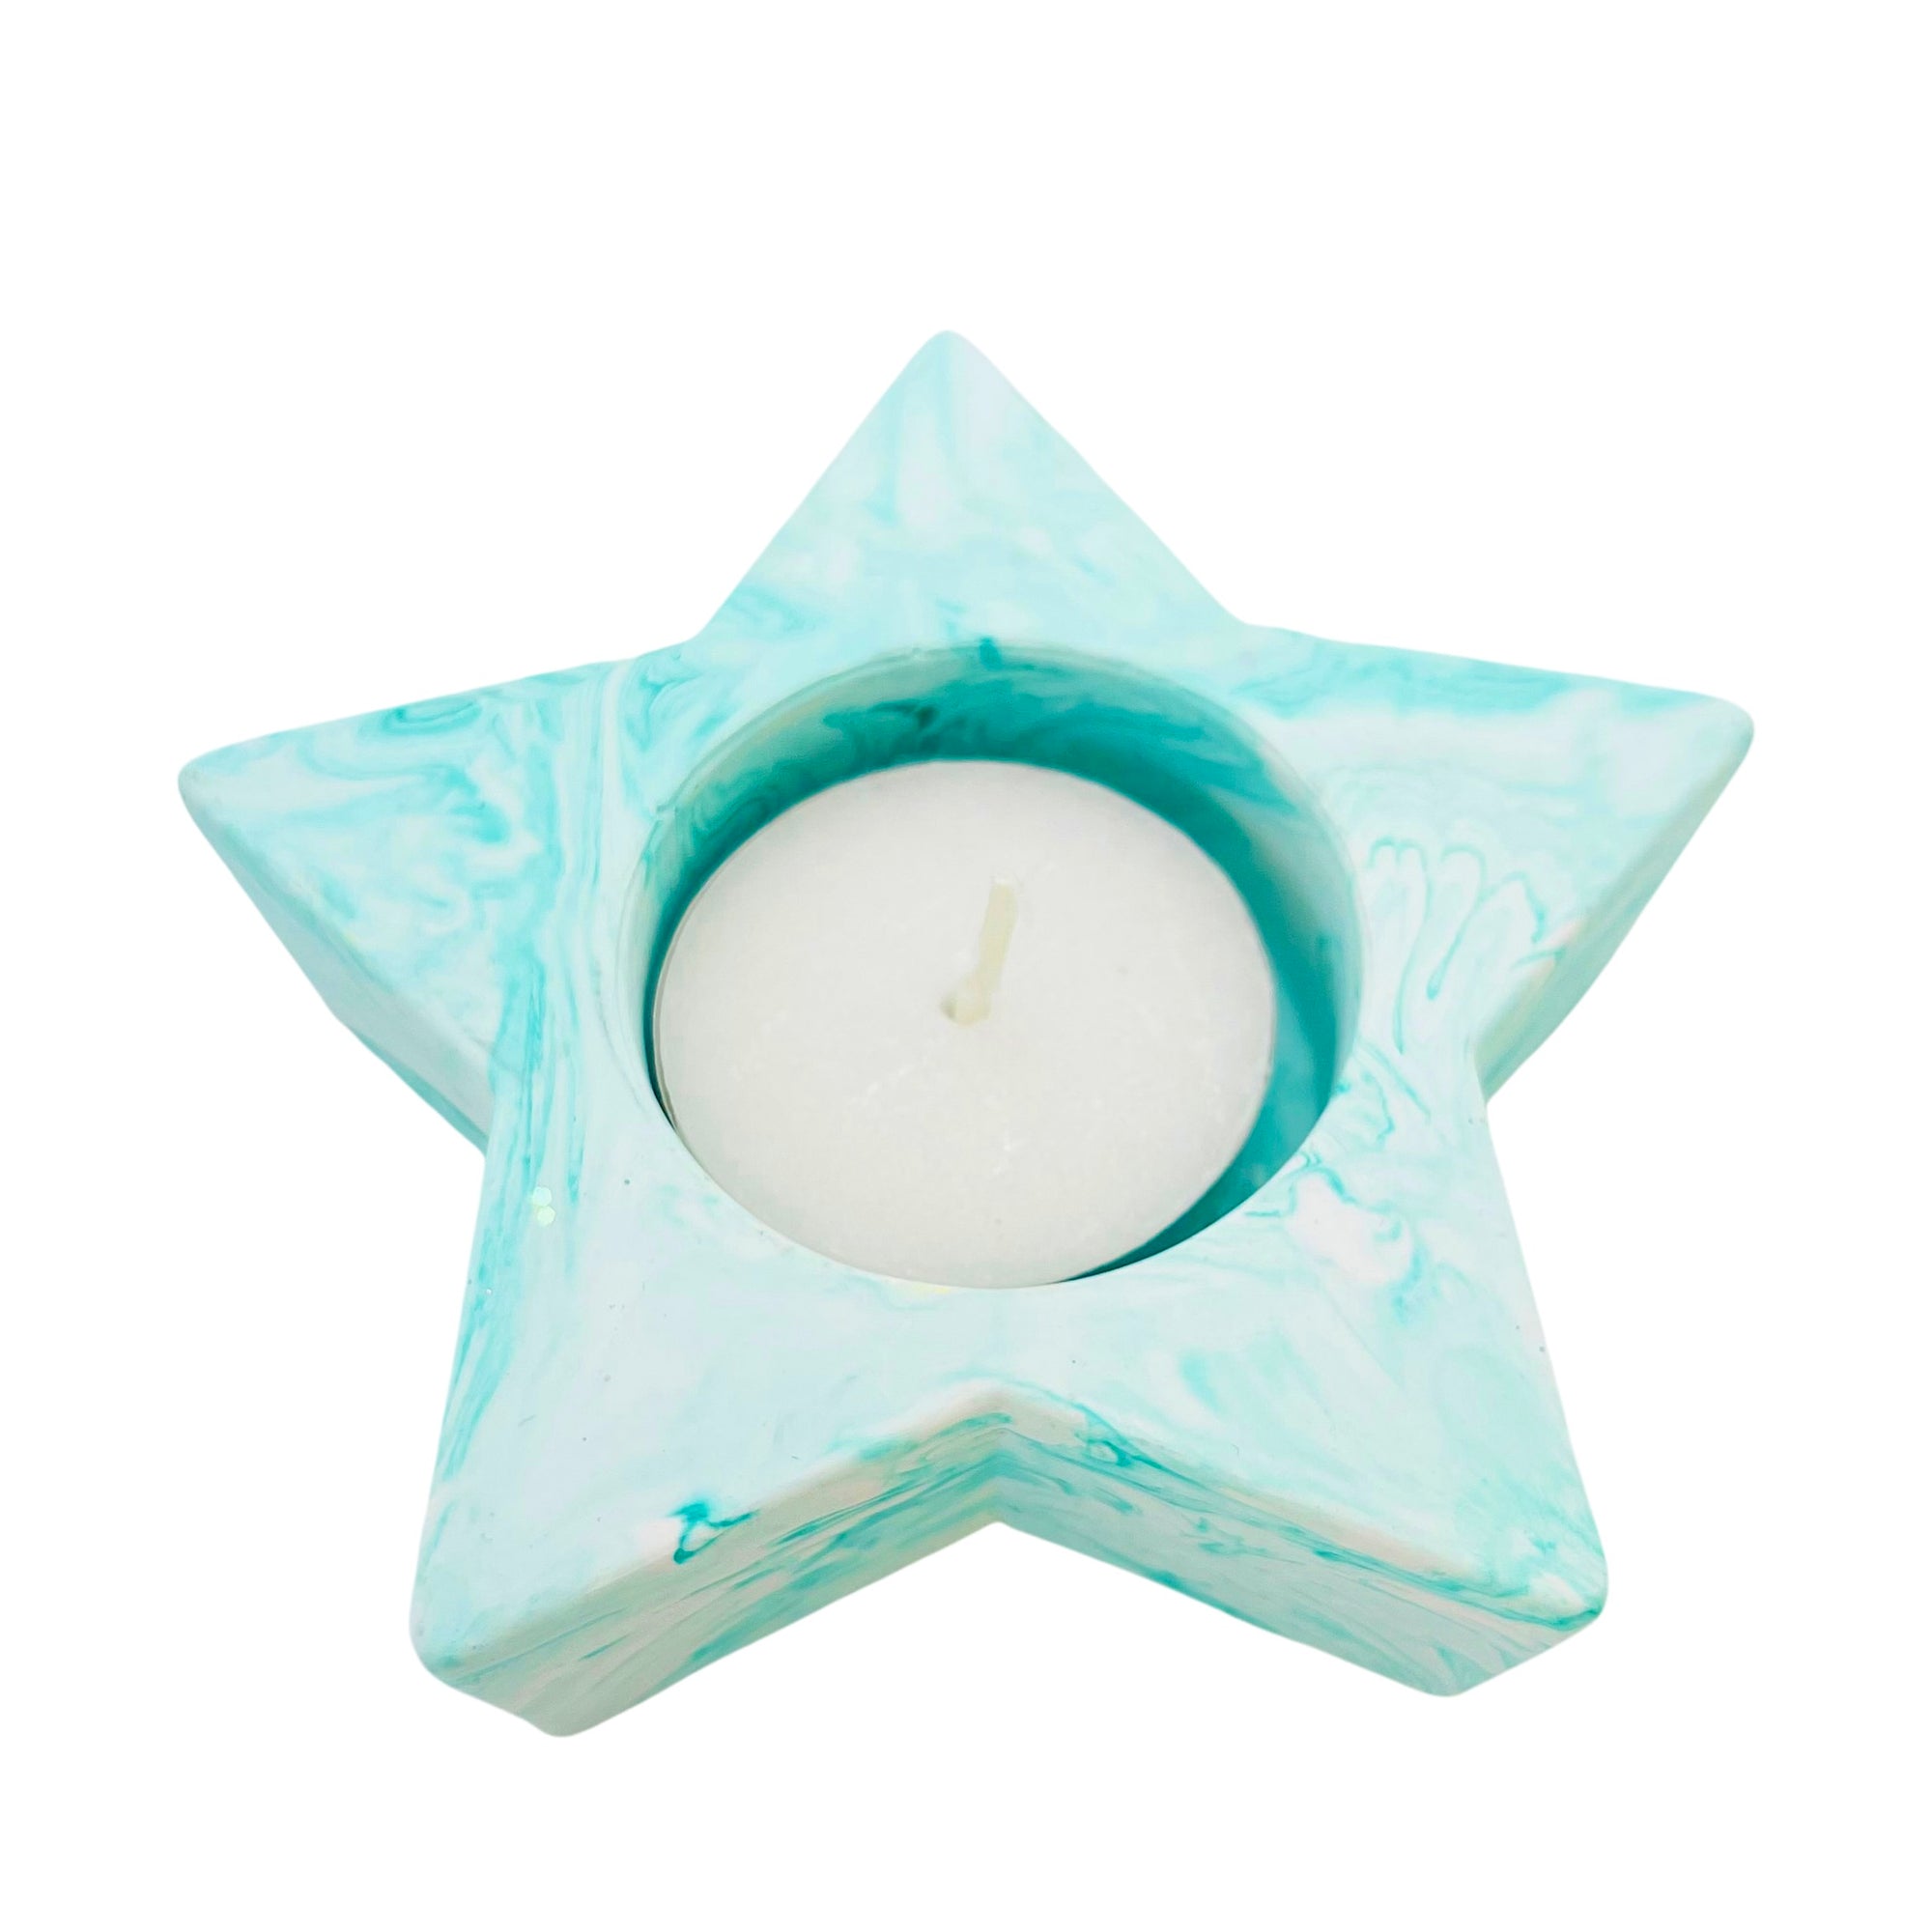 A star shaped Jesmonite tealight holder measuring 10cm in width marbled with turquoise pigment.